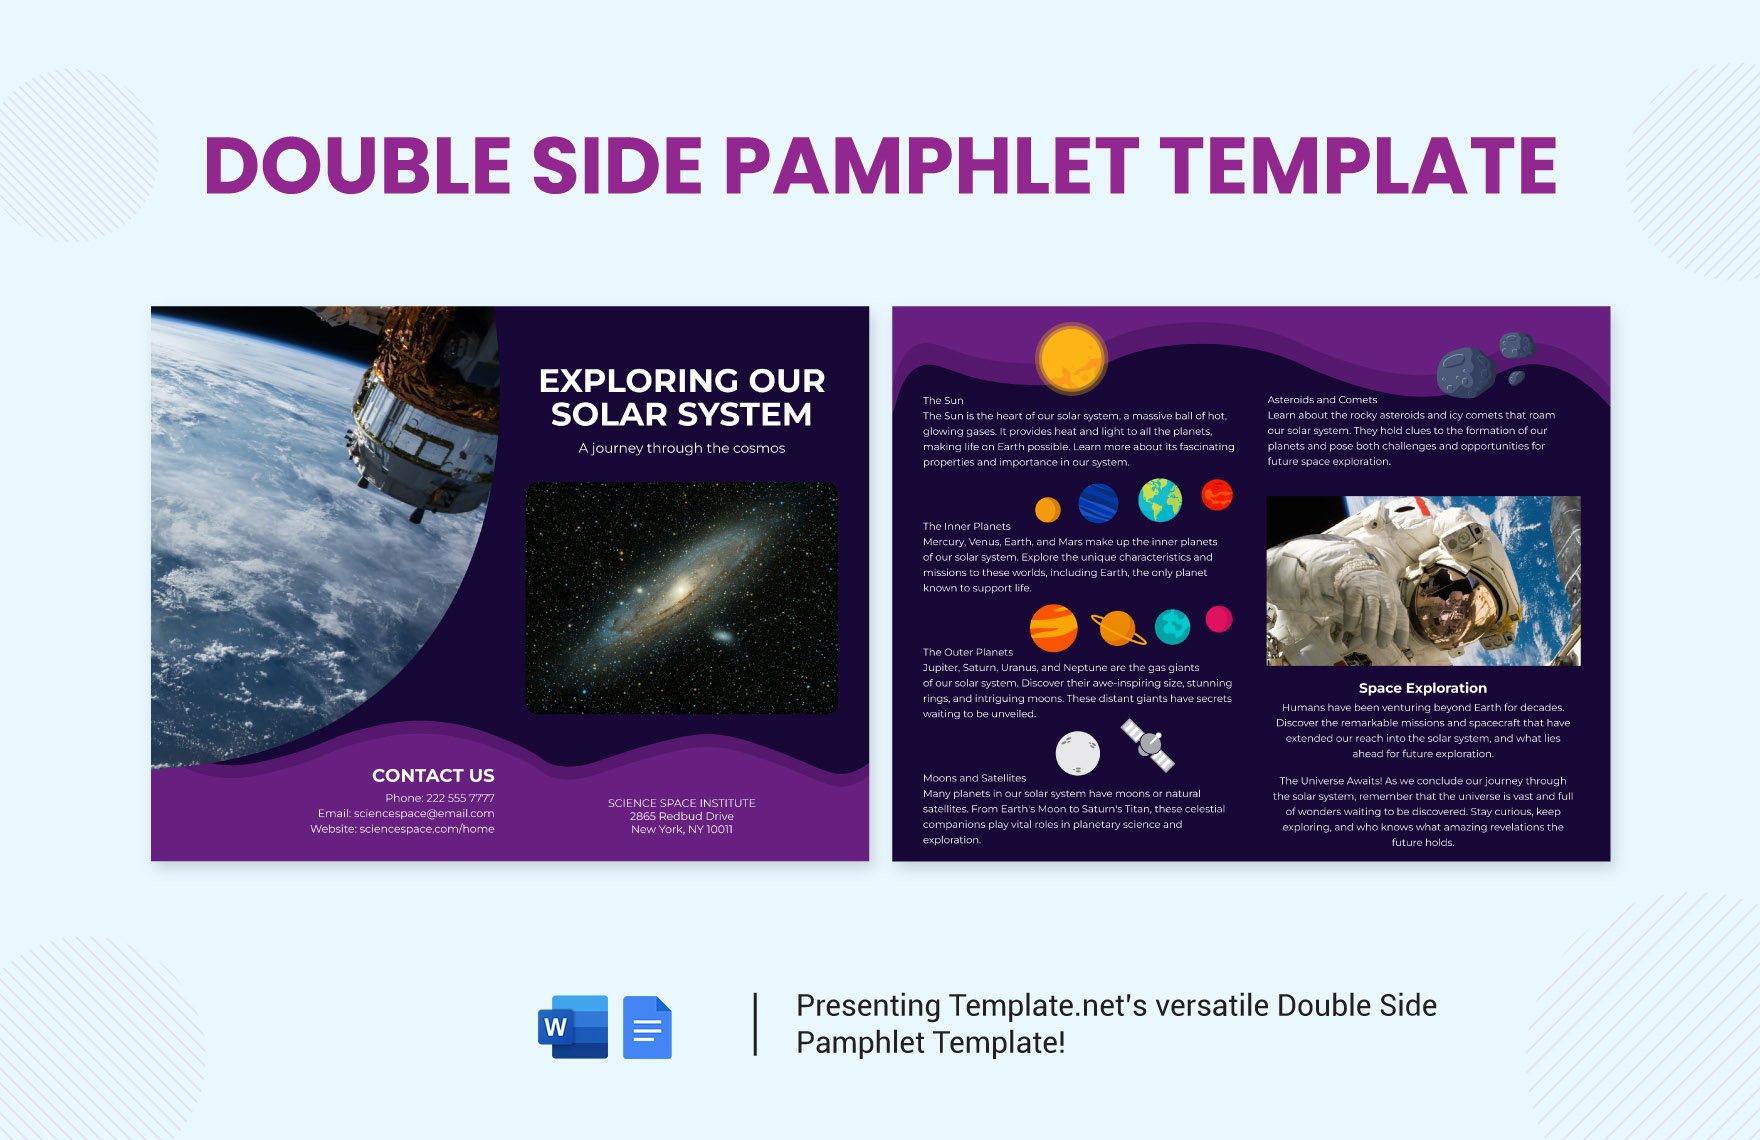 Pamphlet Template in Word FREE Download Template net